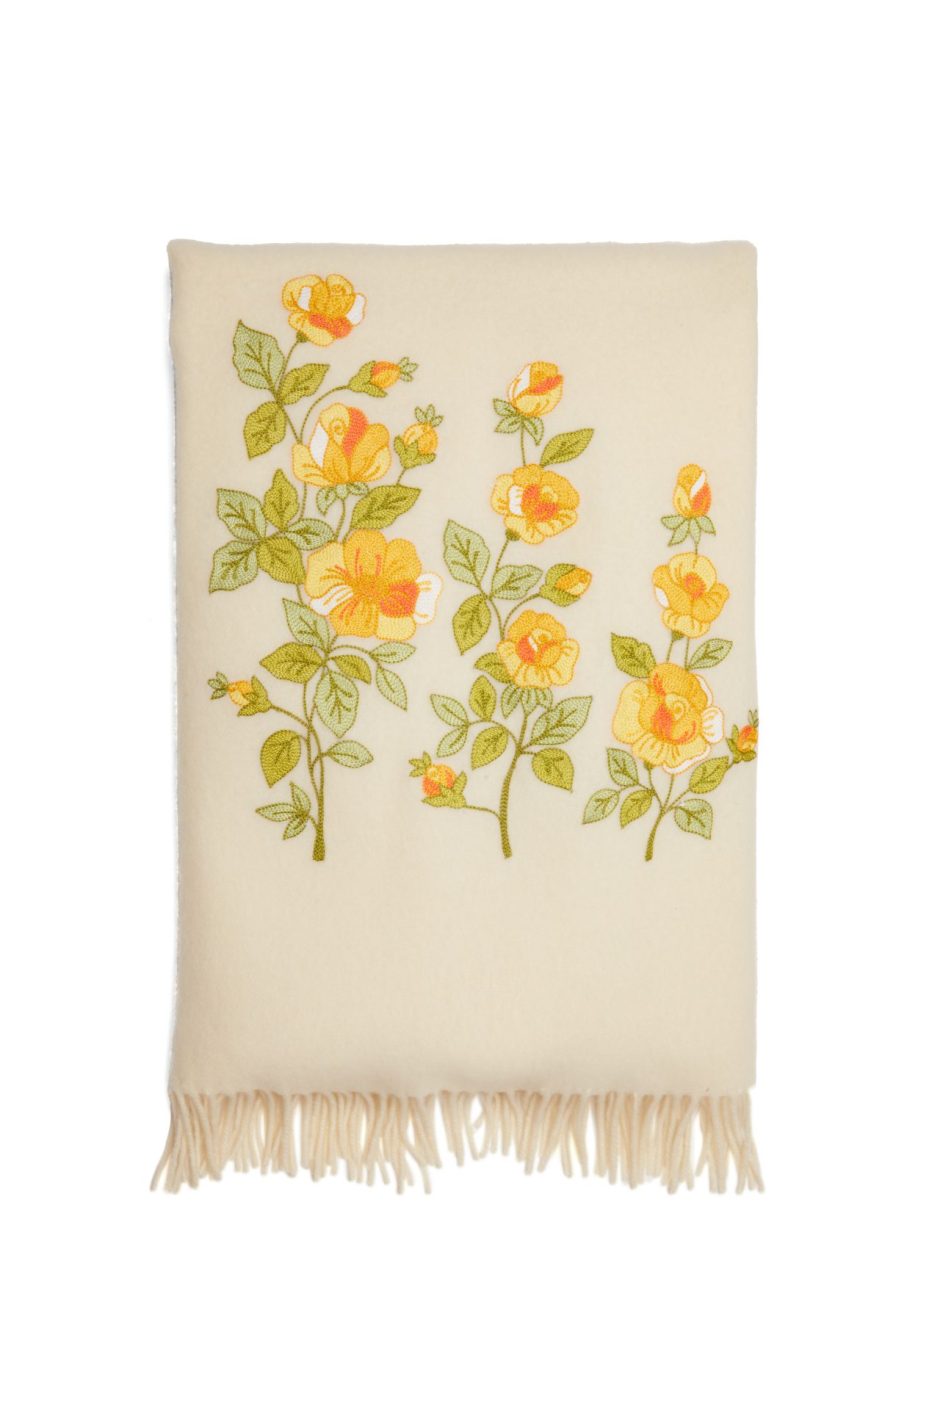 TROW BLANKET C-060 CLIMBING ROSES EMBROIDERED